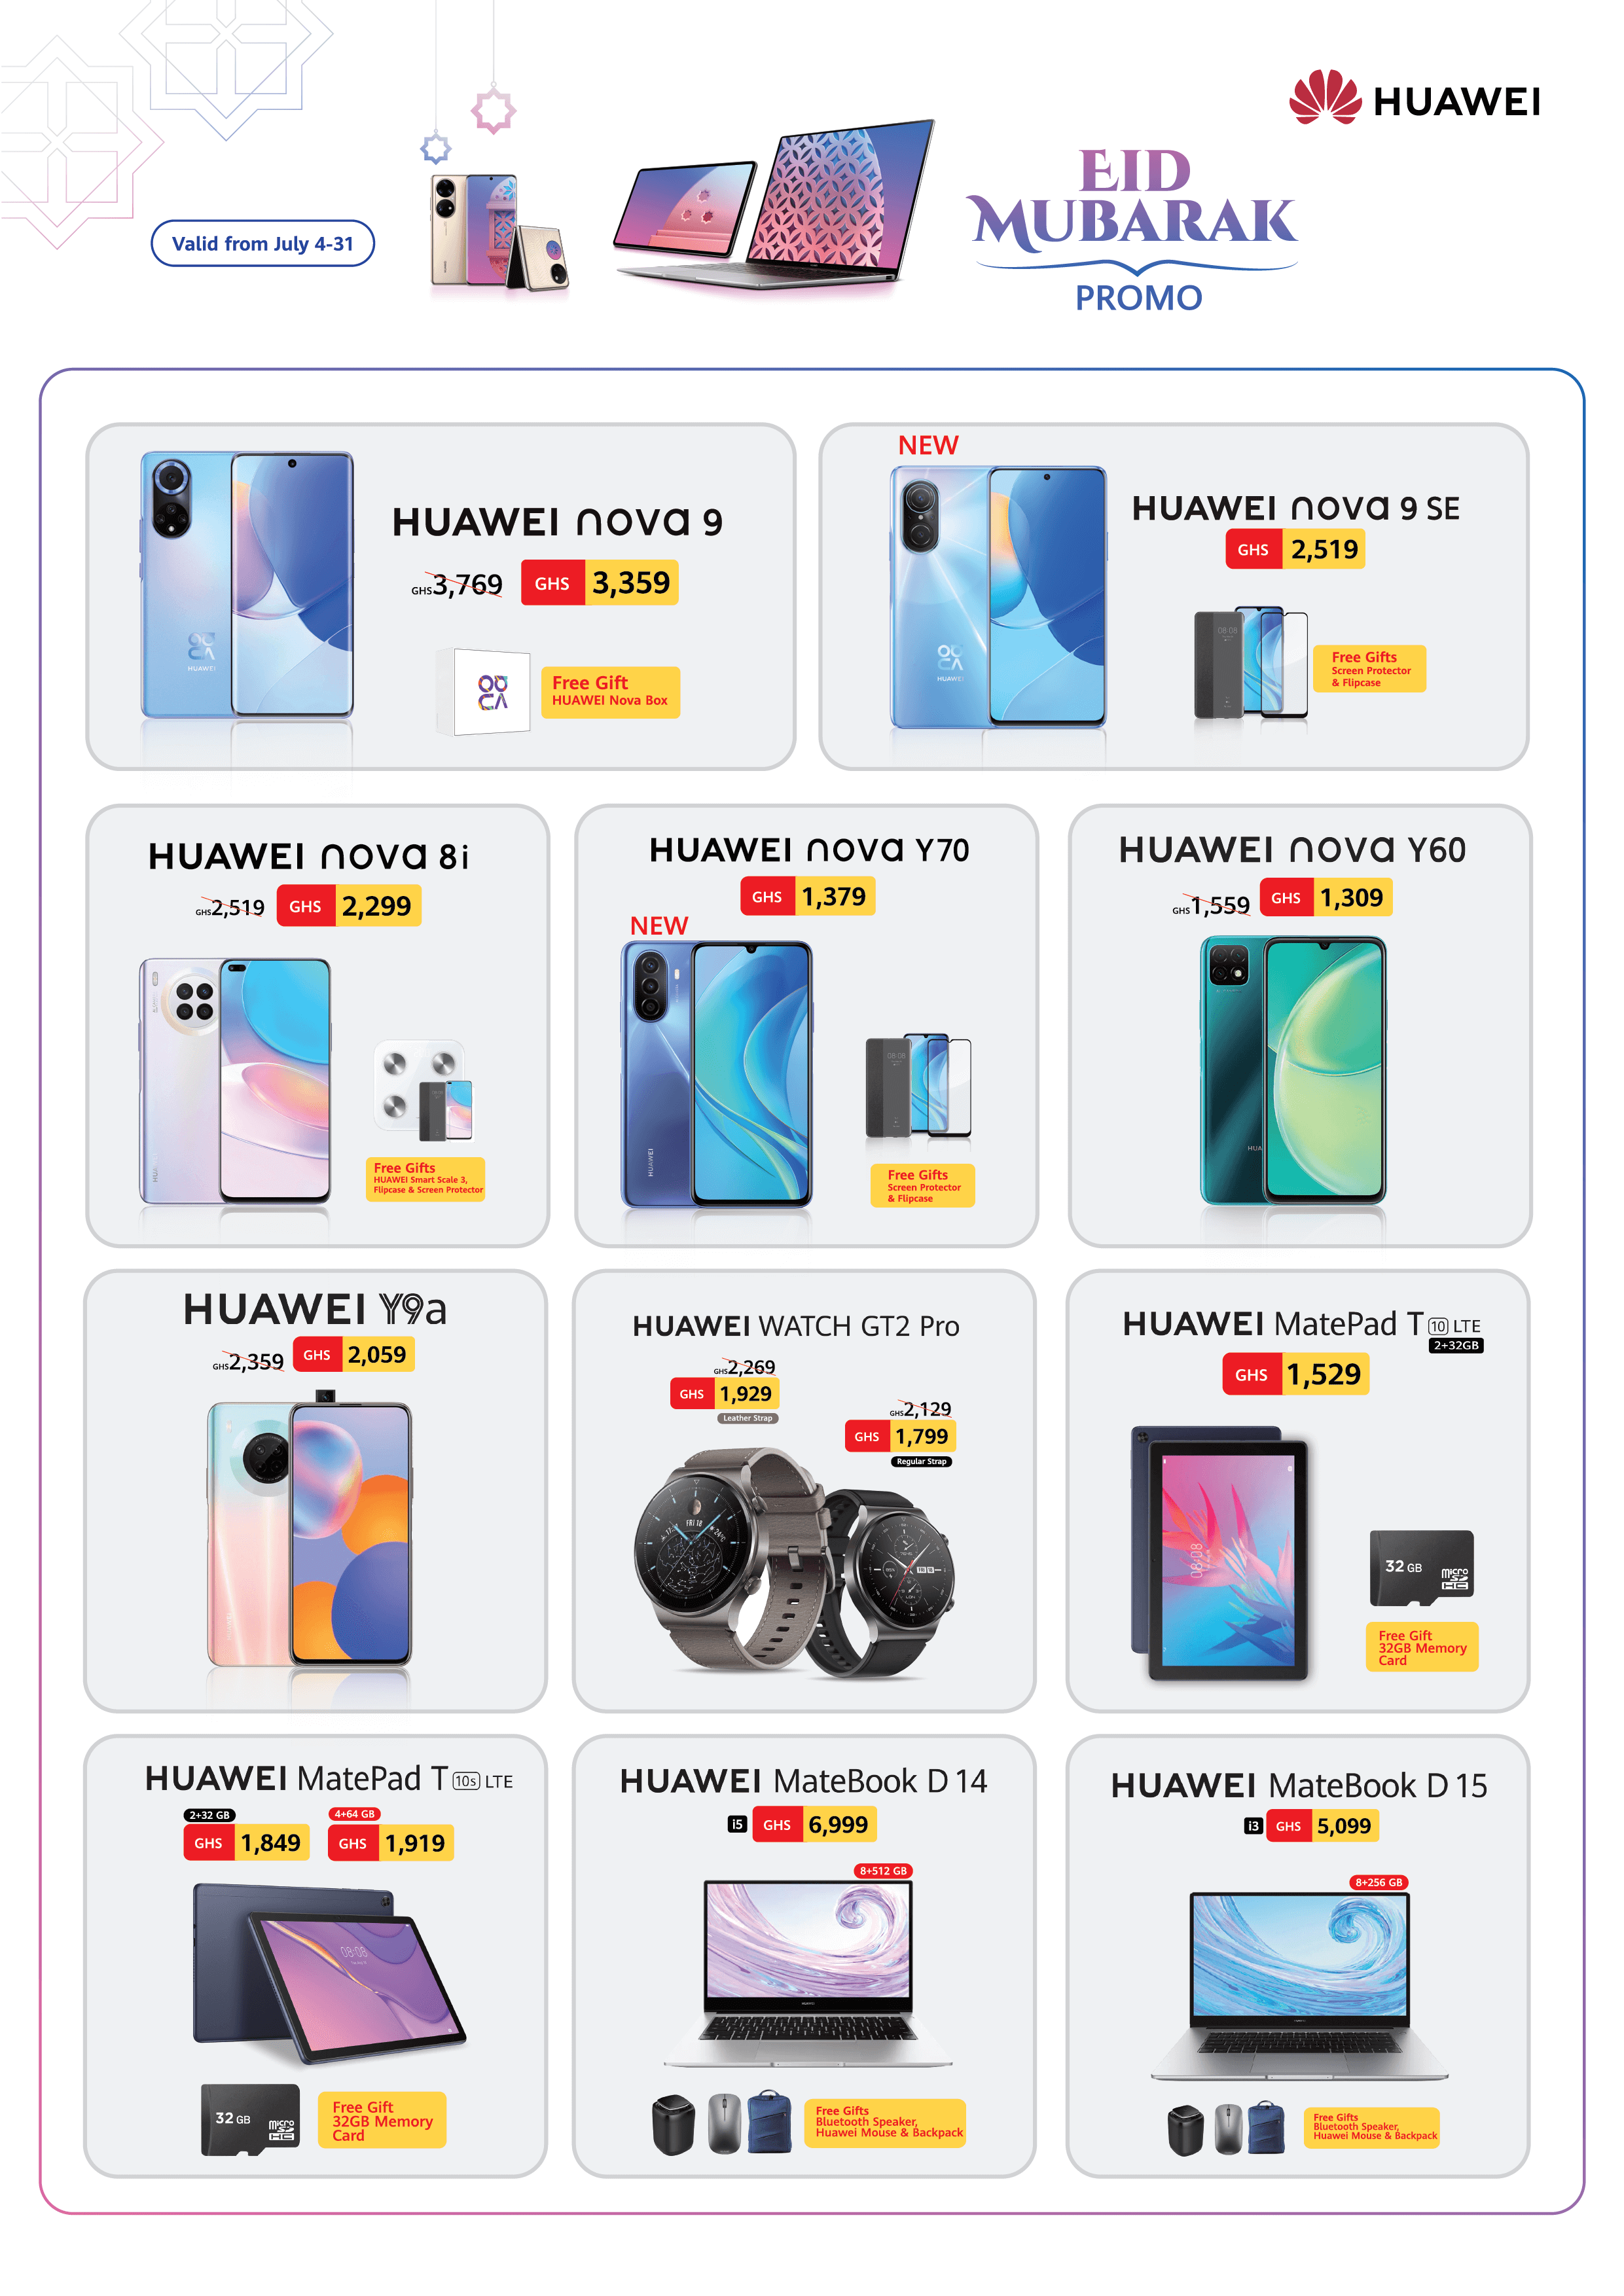 Get The Best Deals And Offers With Huawei This Eid